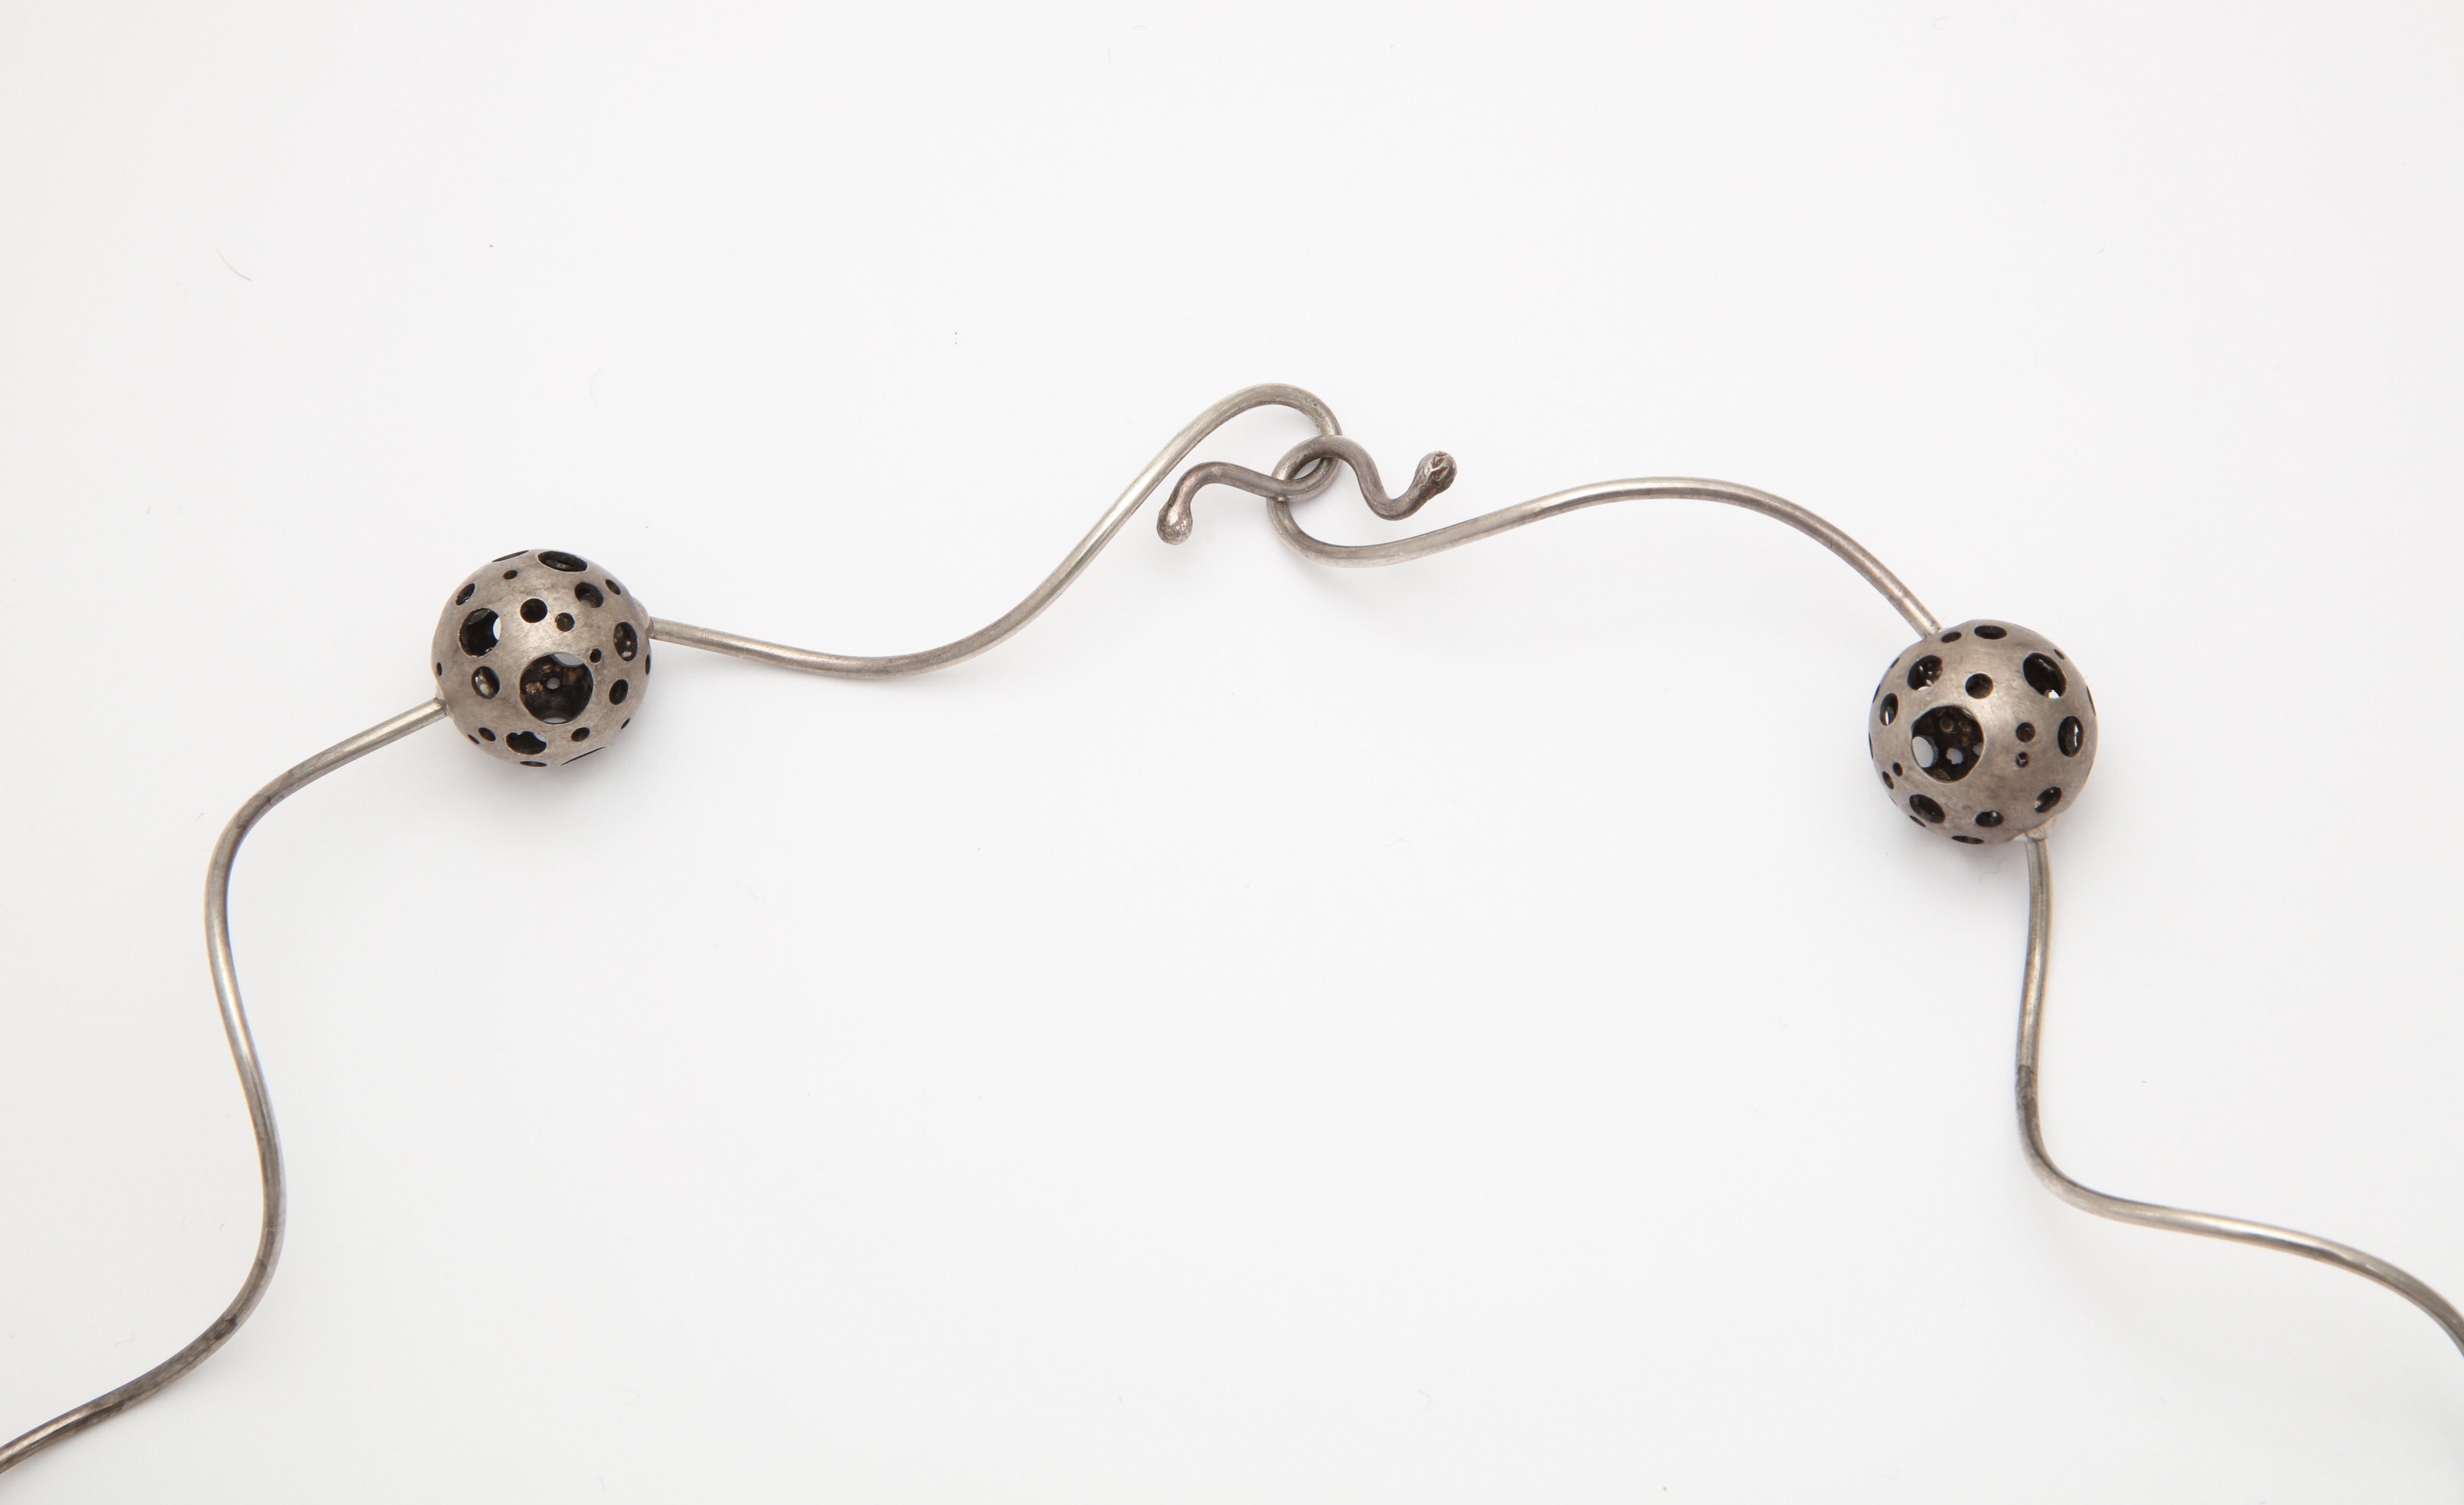 A wonderful modernist silver necklace with 9 pierced spheres threaded through with curly silver rods